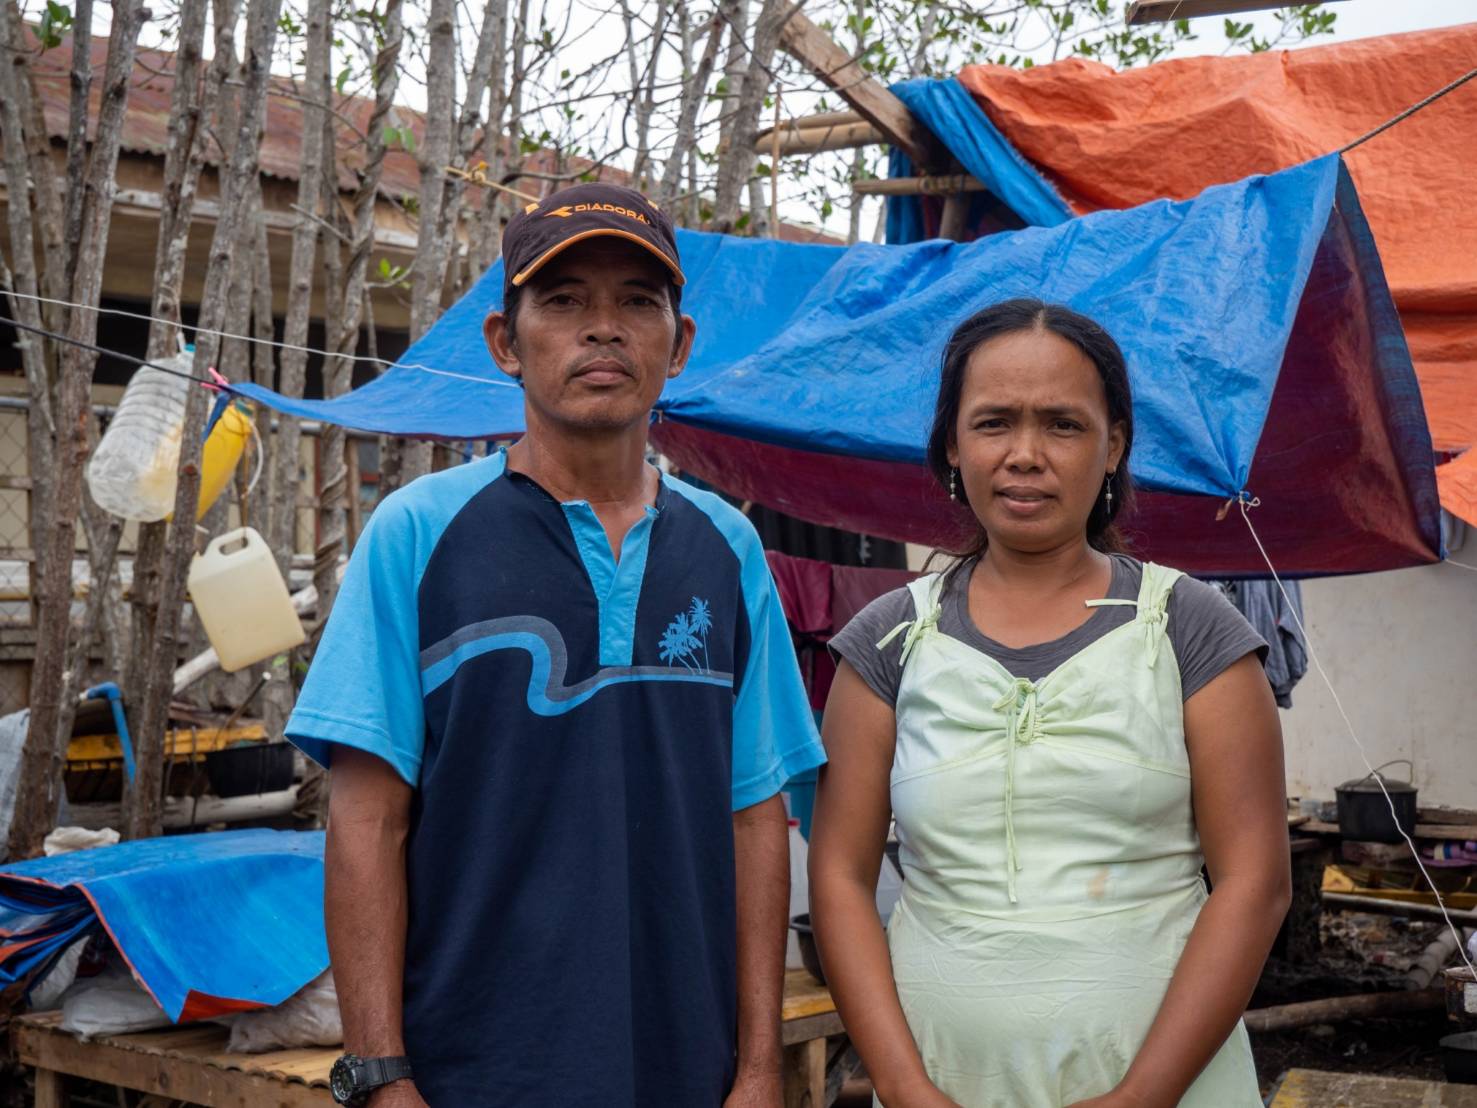 Nestor Browen (left), seen here with wife Jovelyn, lost his home, banca, and fishing net after Odette. The 49-year-old fisherman from Barangay Matabao now sells shells to earn money. 【Photo by Marella Saldonido】